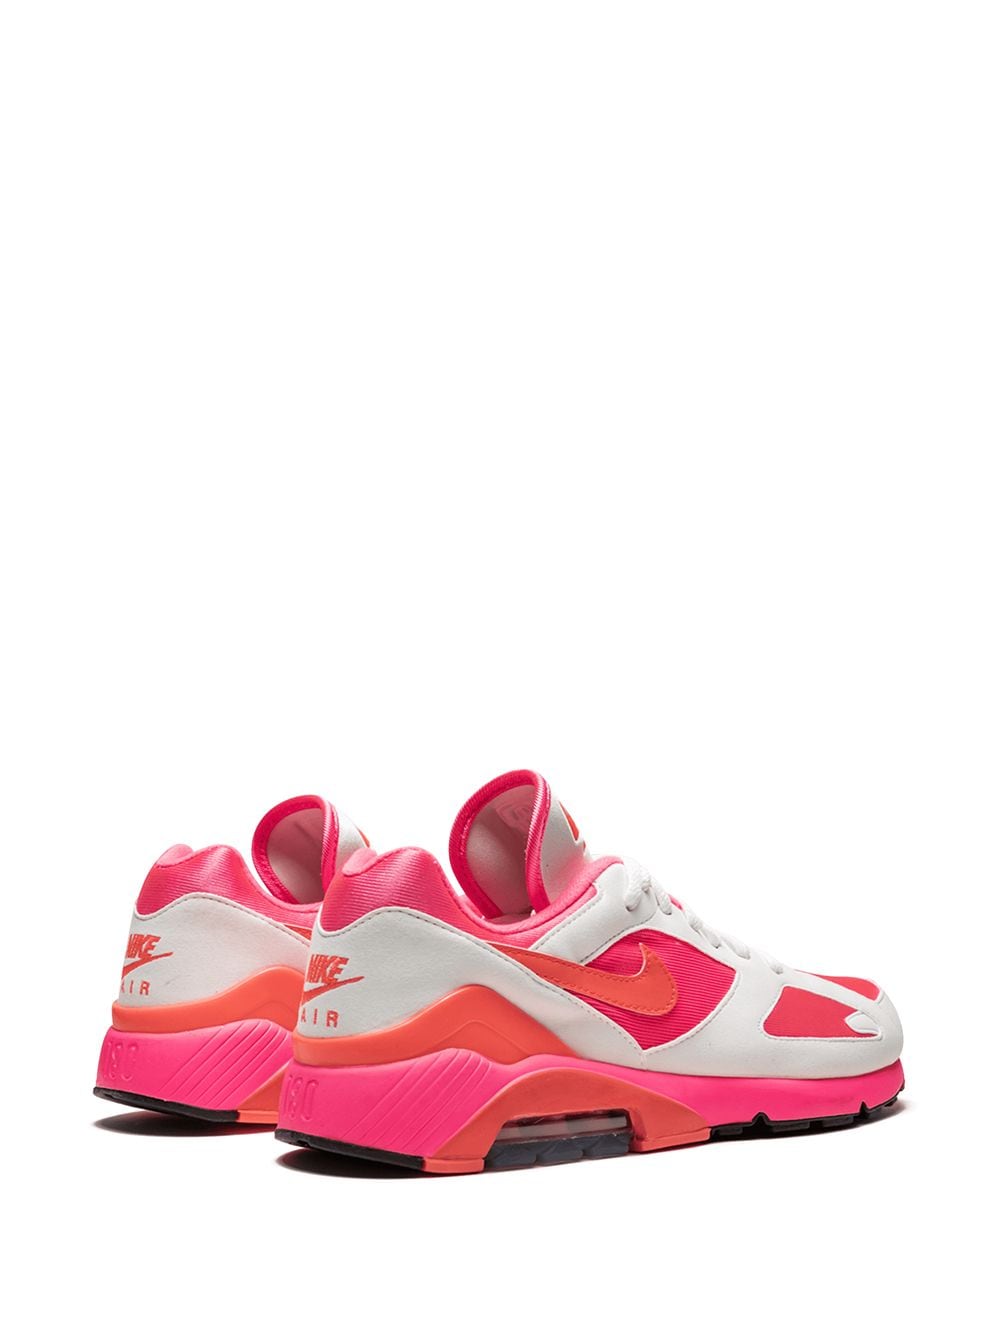 Shop Nike X Comme Des Garçons Air Max 180 Sneakers In Pink